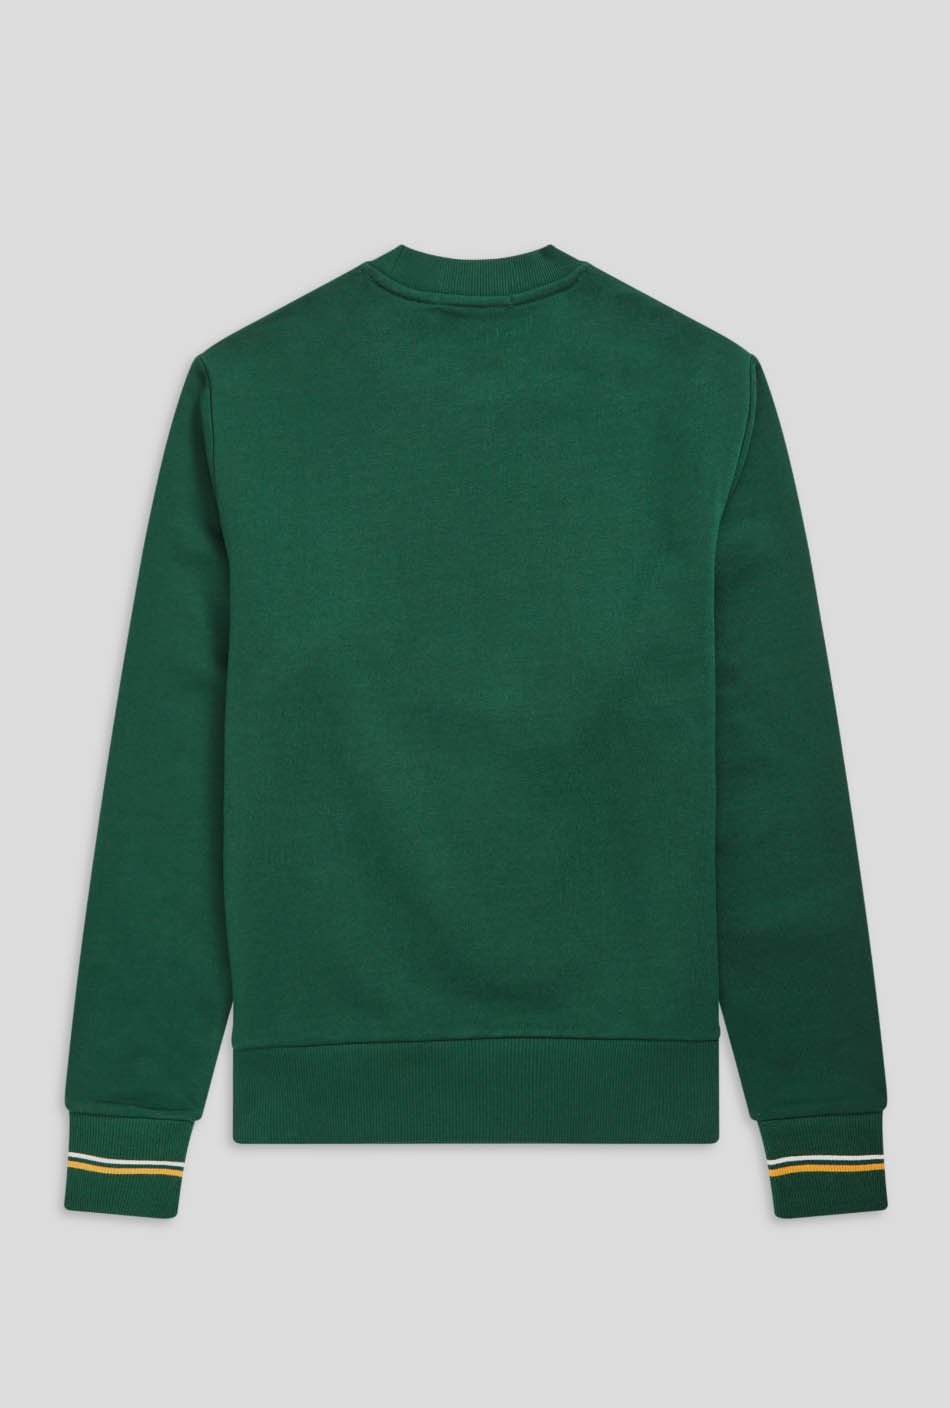 Fred Perry Pullover in Grün